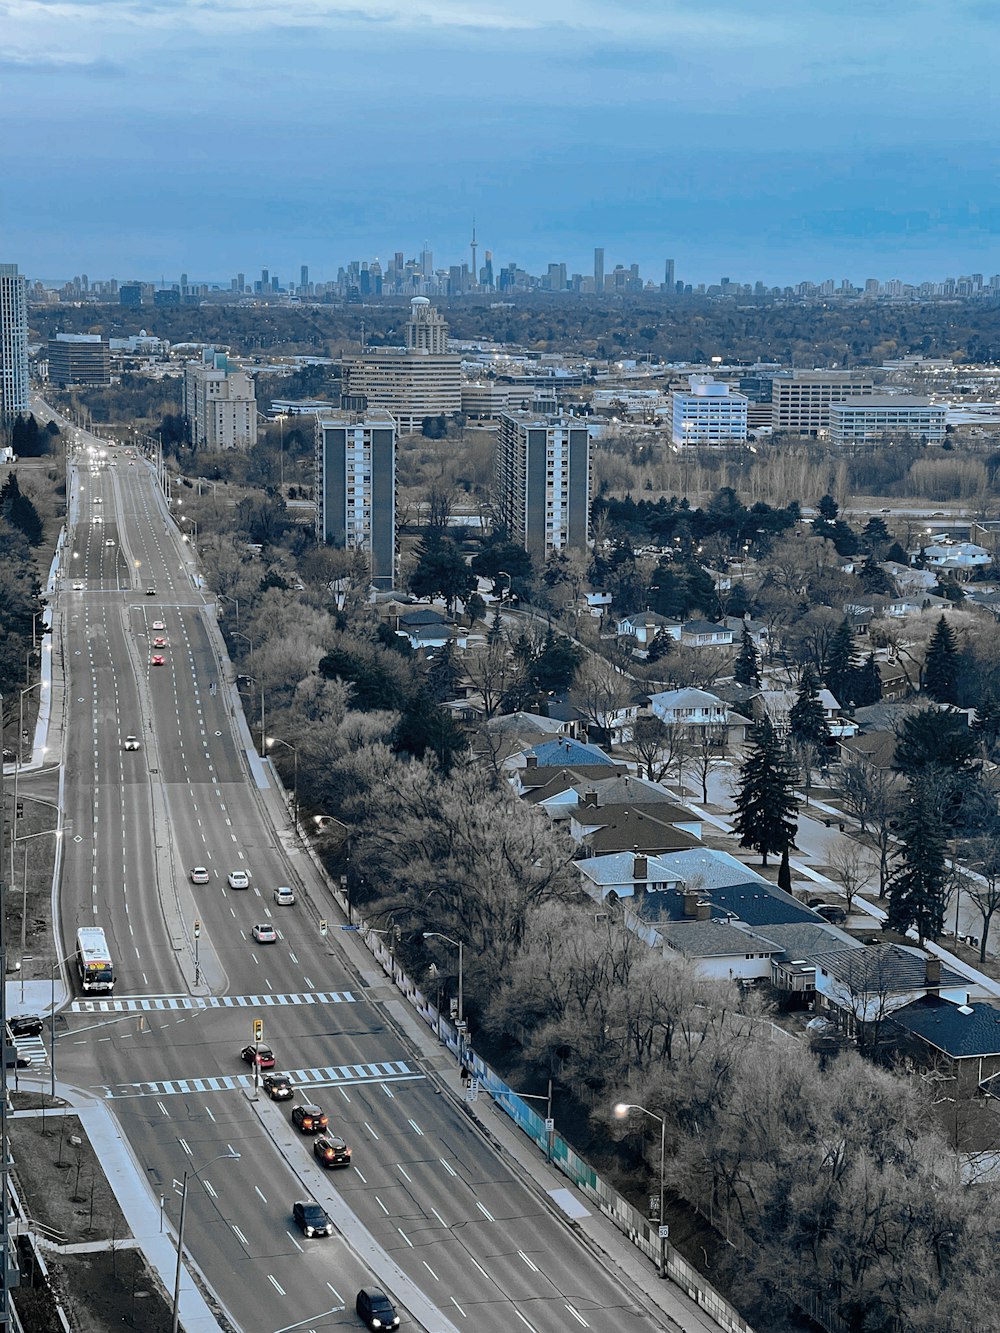 an aerial view of a city with a highway in the foreground